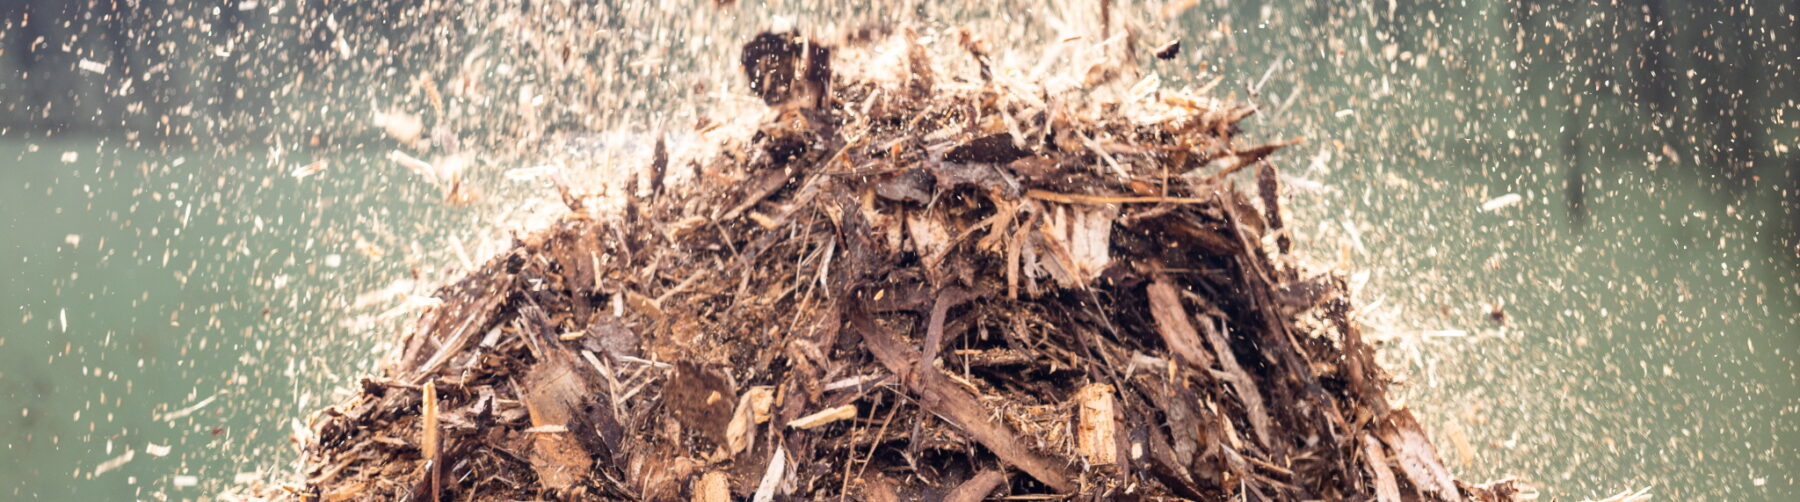 A pile of sawmill by-products on which even more fall